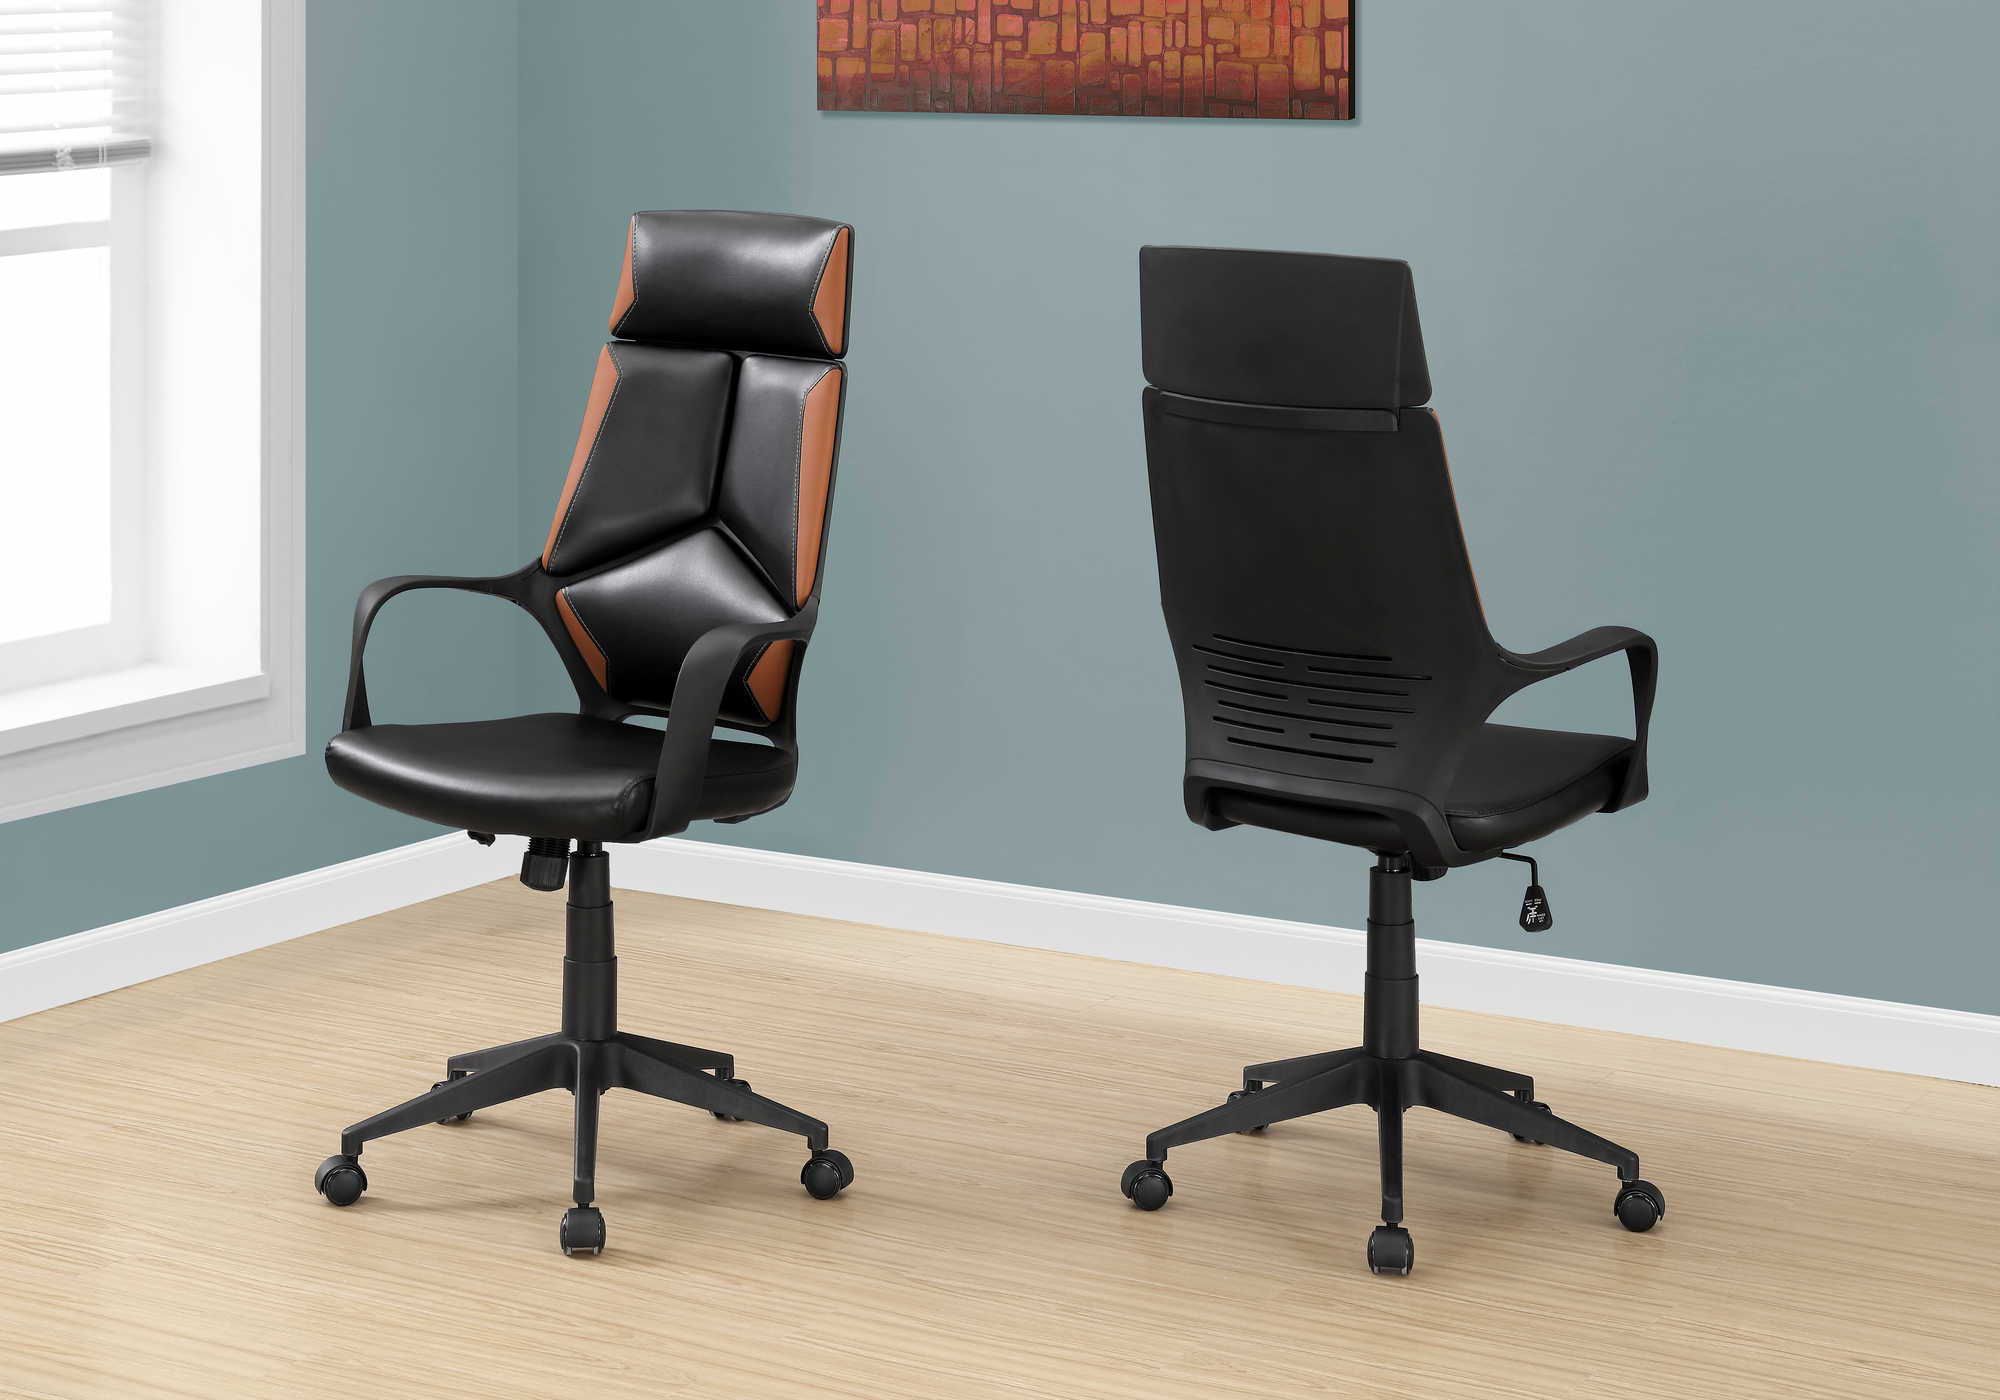 OFFICE CHAIR - BLACK / BROWN LEATHER-LOOK / EXECUTIVE